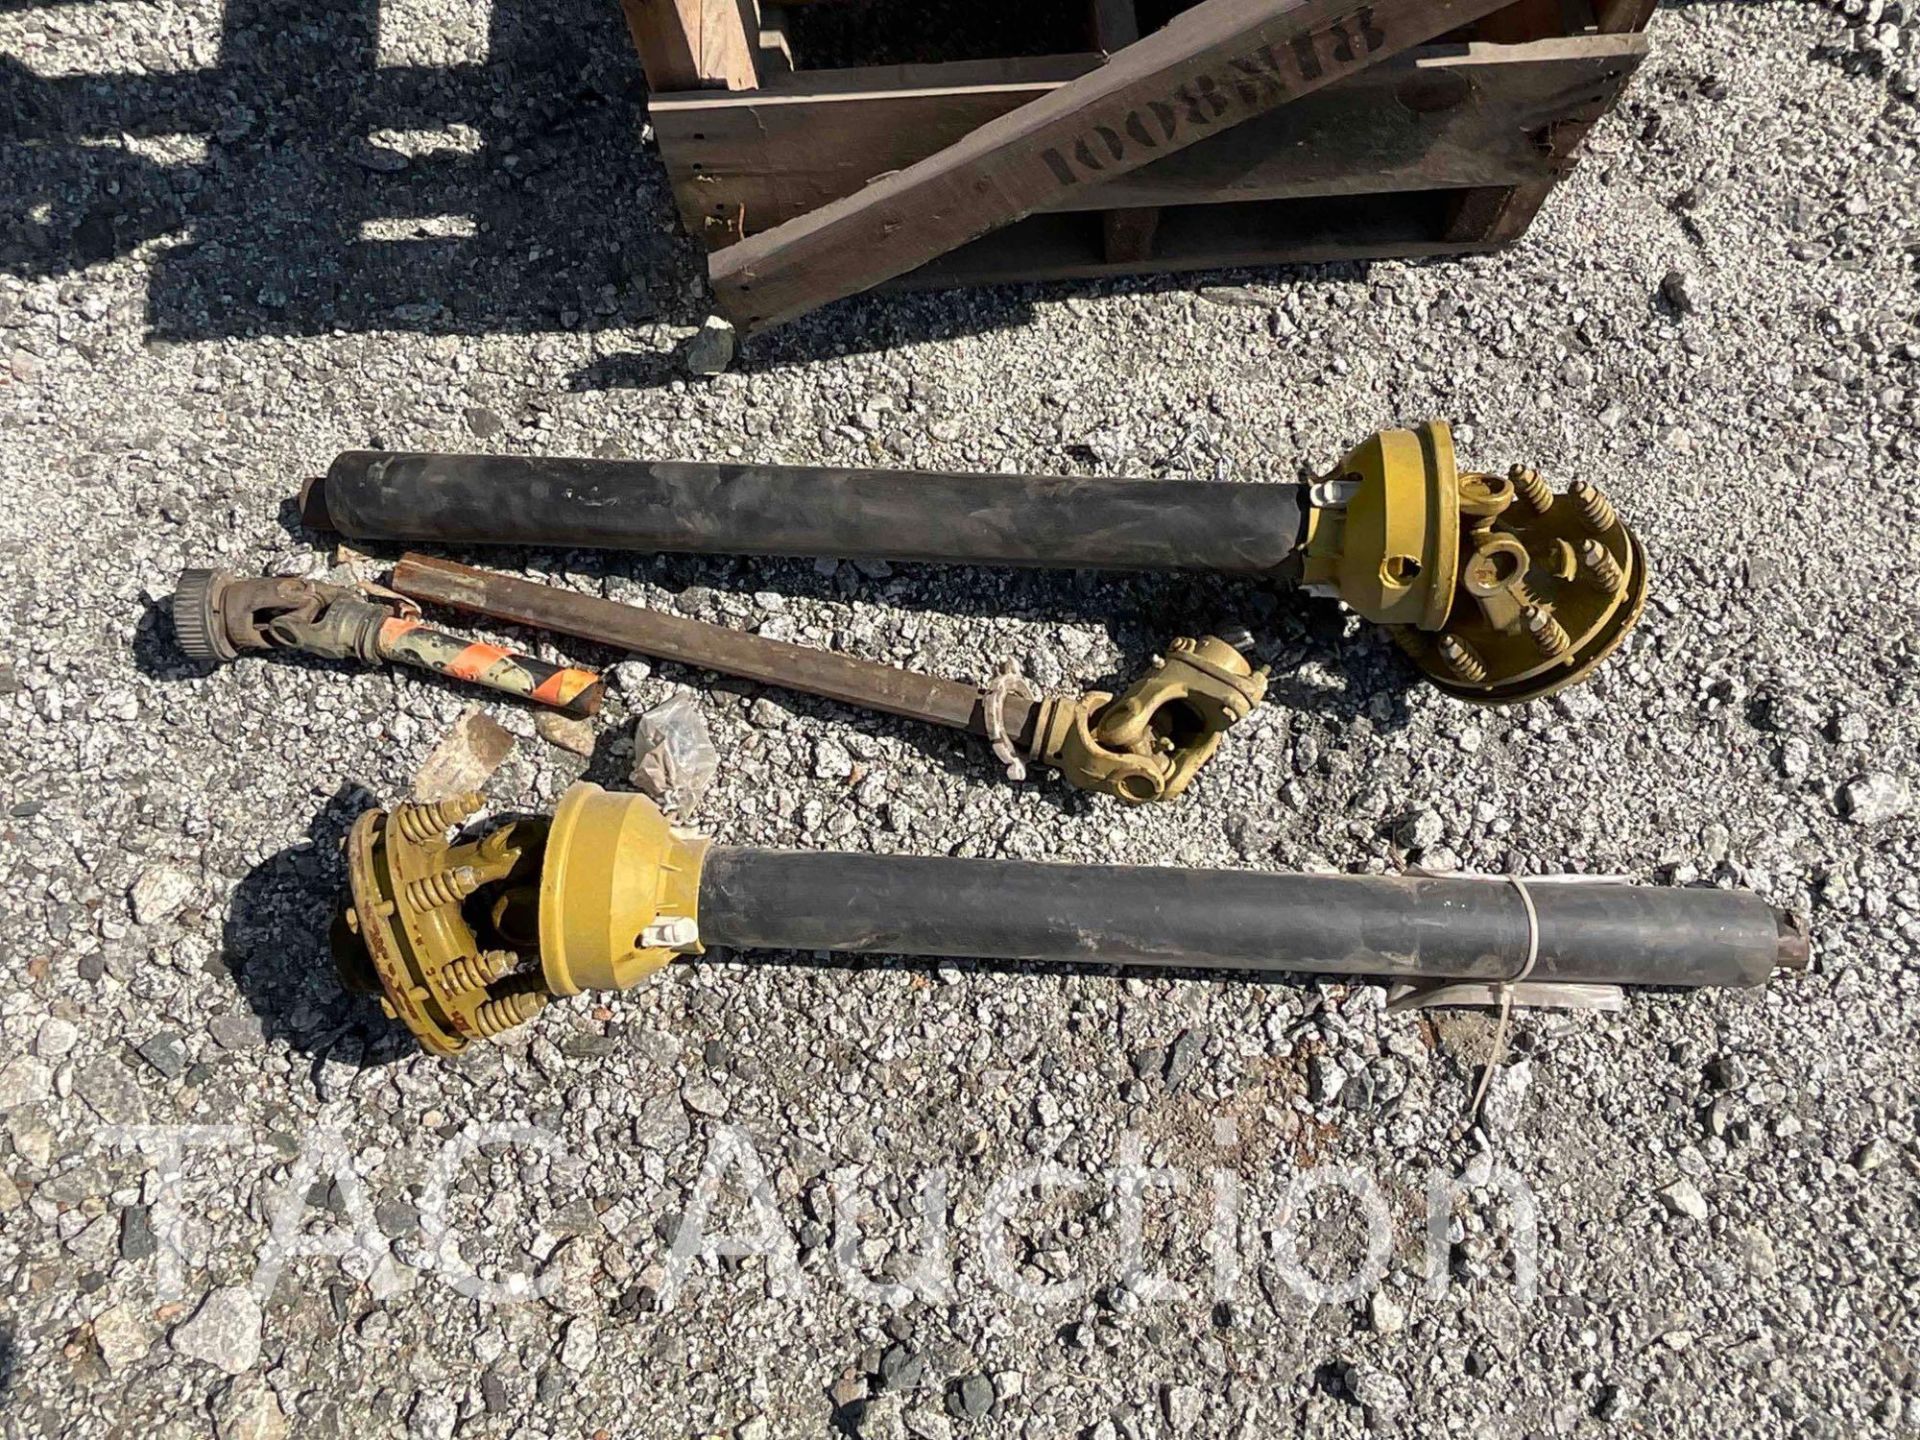 New/Unused Assorted PTO Shafts and Safety Shields - Image 3 of 4